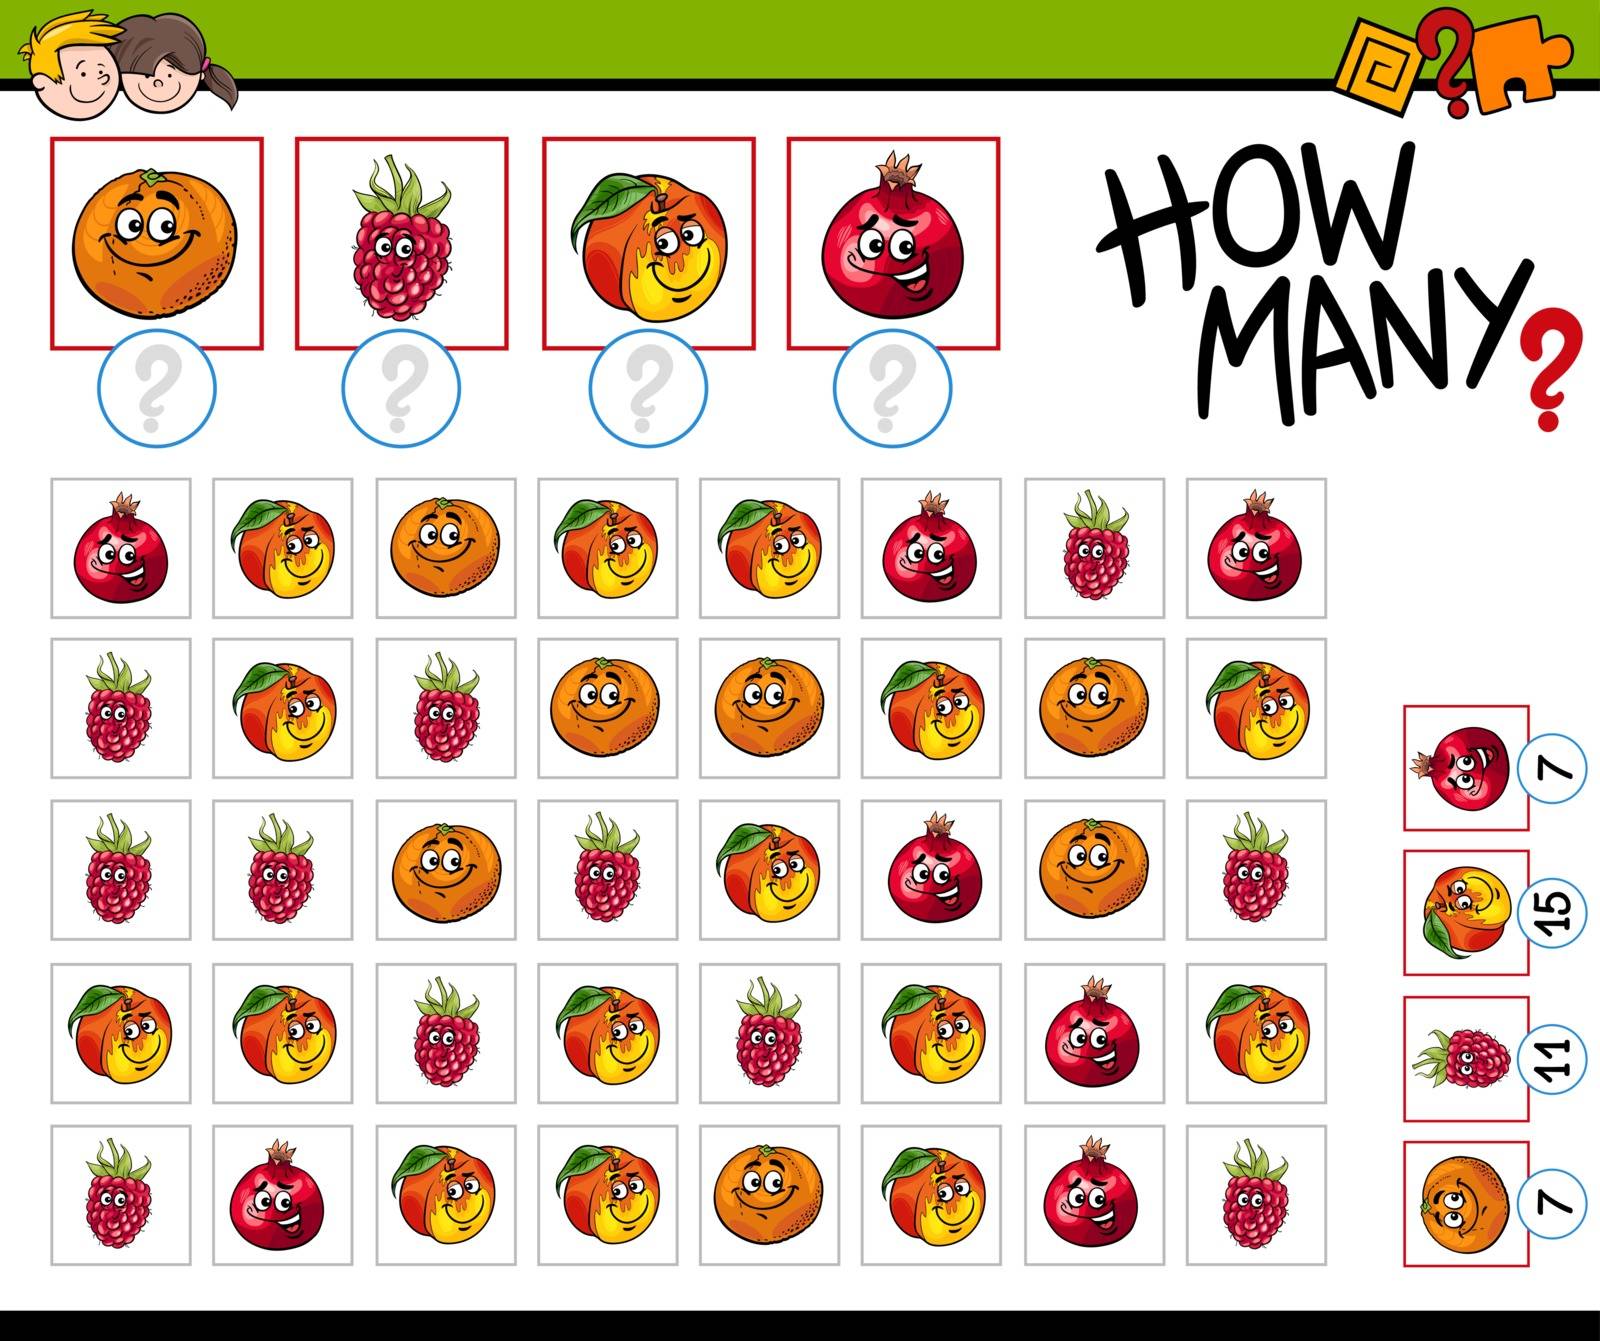 Cartoon Illustration of Educational Counting Activity for Children with Fruit Characters